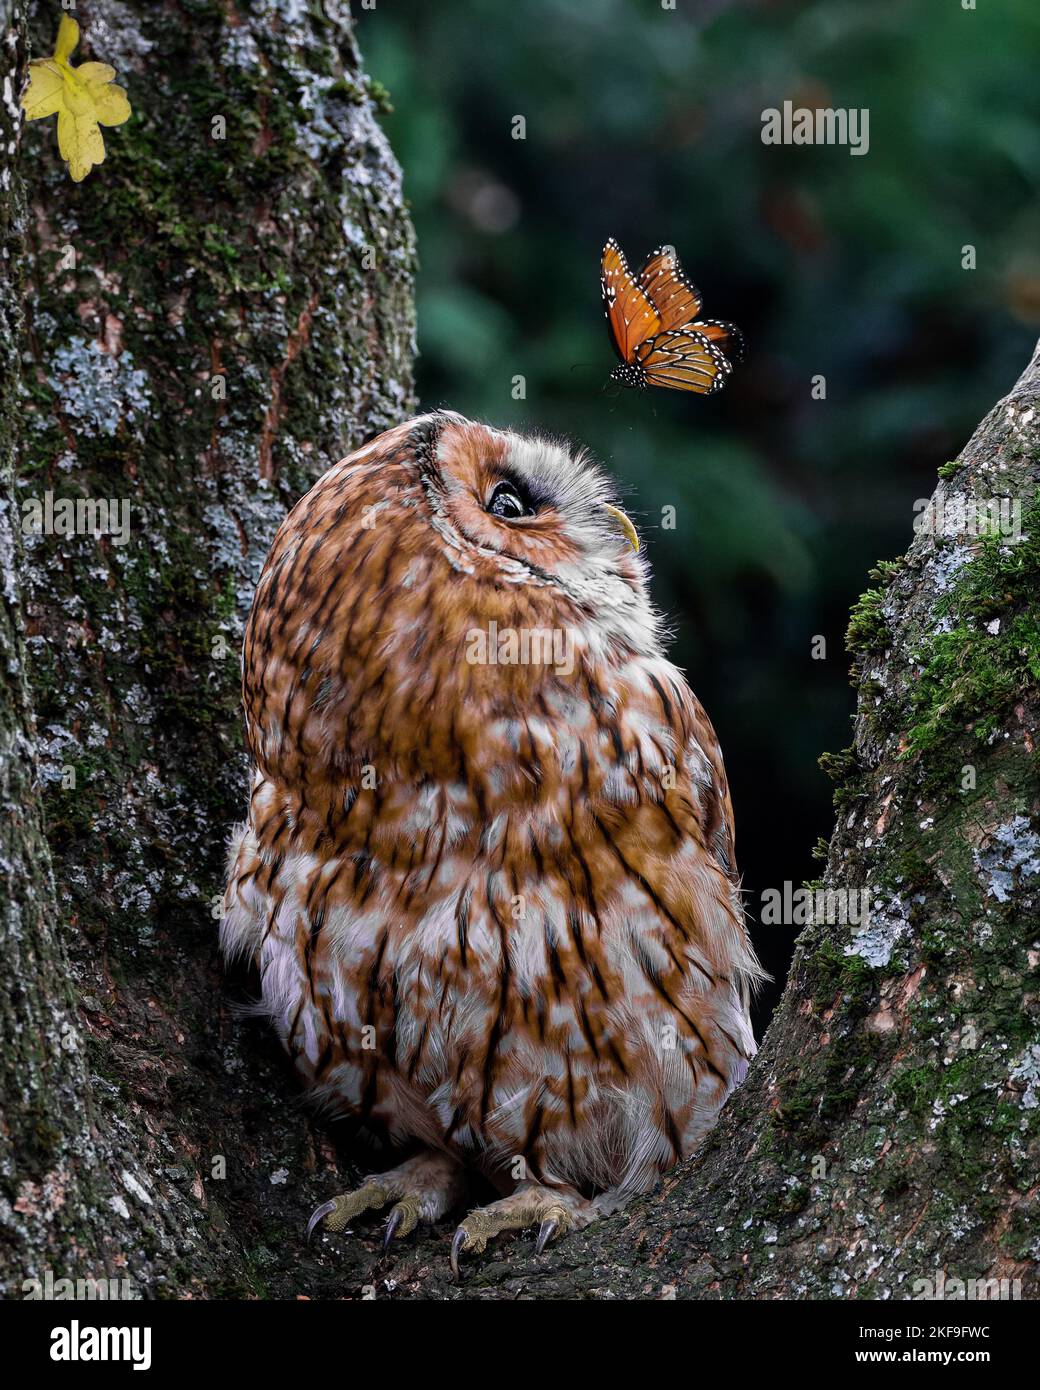 THE MAGICAL moment a painted lady butterfly perched on top of a tawny owl's head has been captured in Lingfield, England. Stock Photo